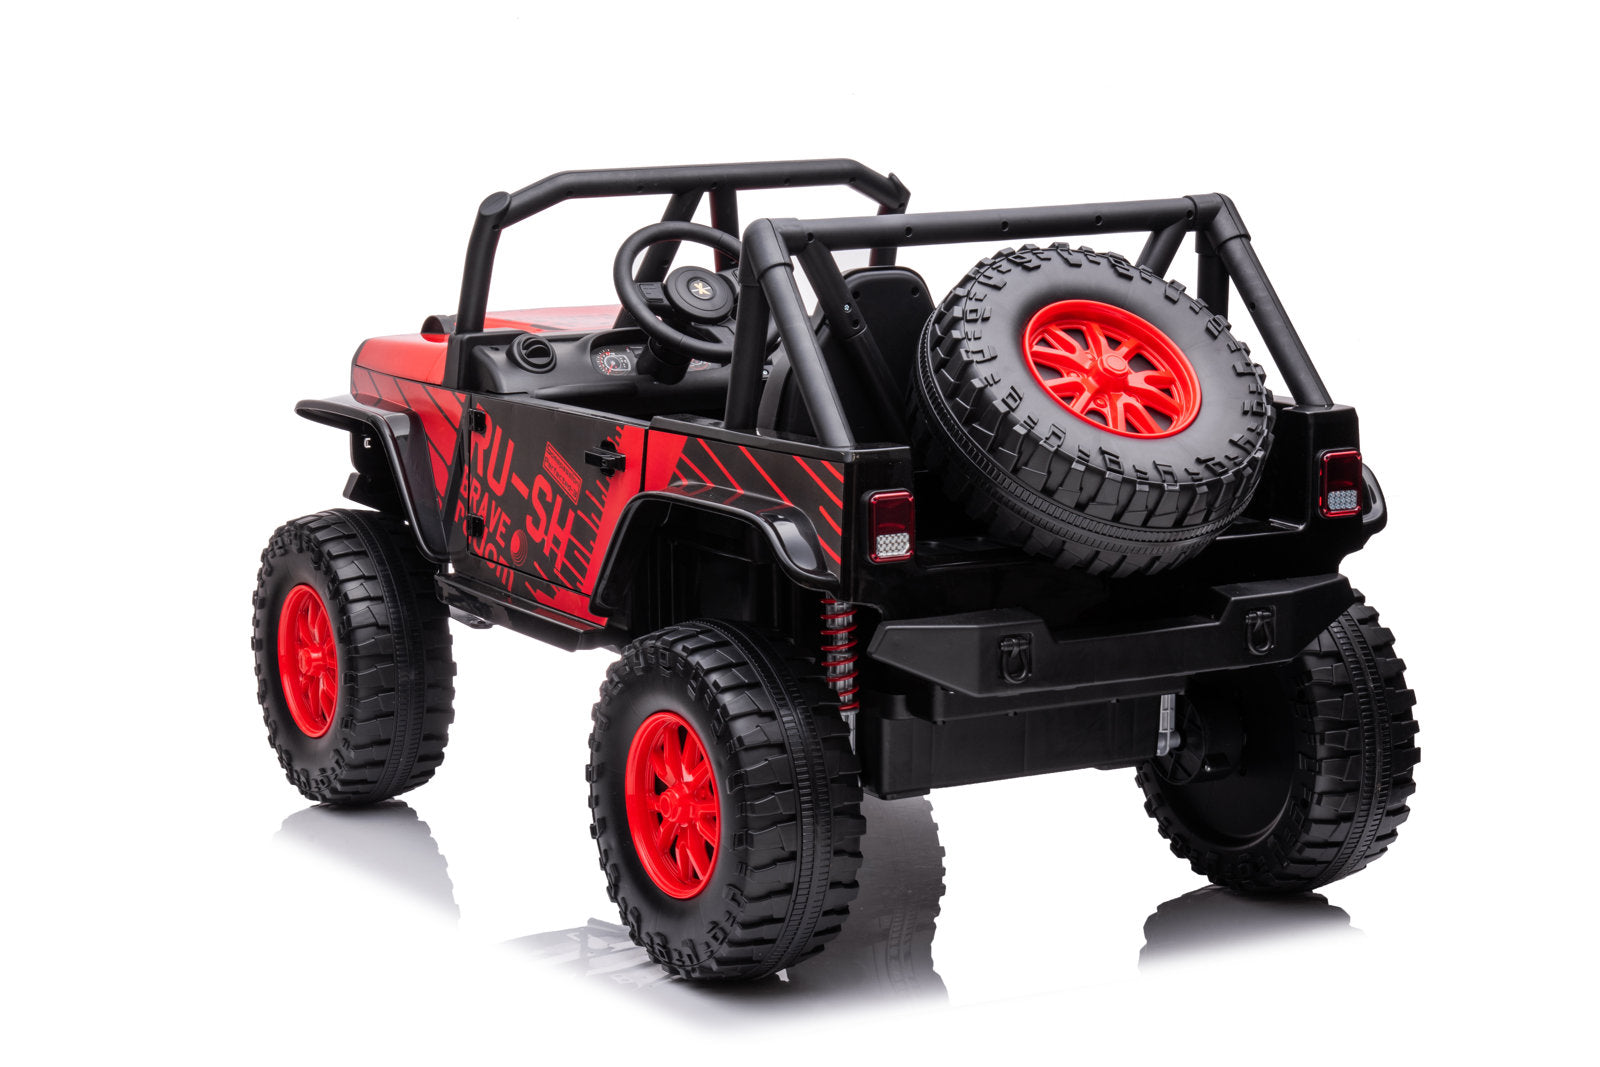 2023 24V Raider Jeep 2 Seater Ride On Cars With Control KINGTOYS.us